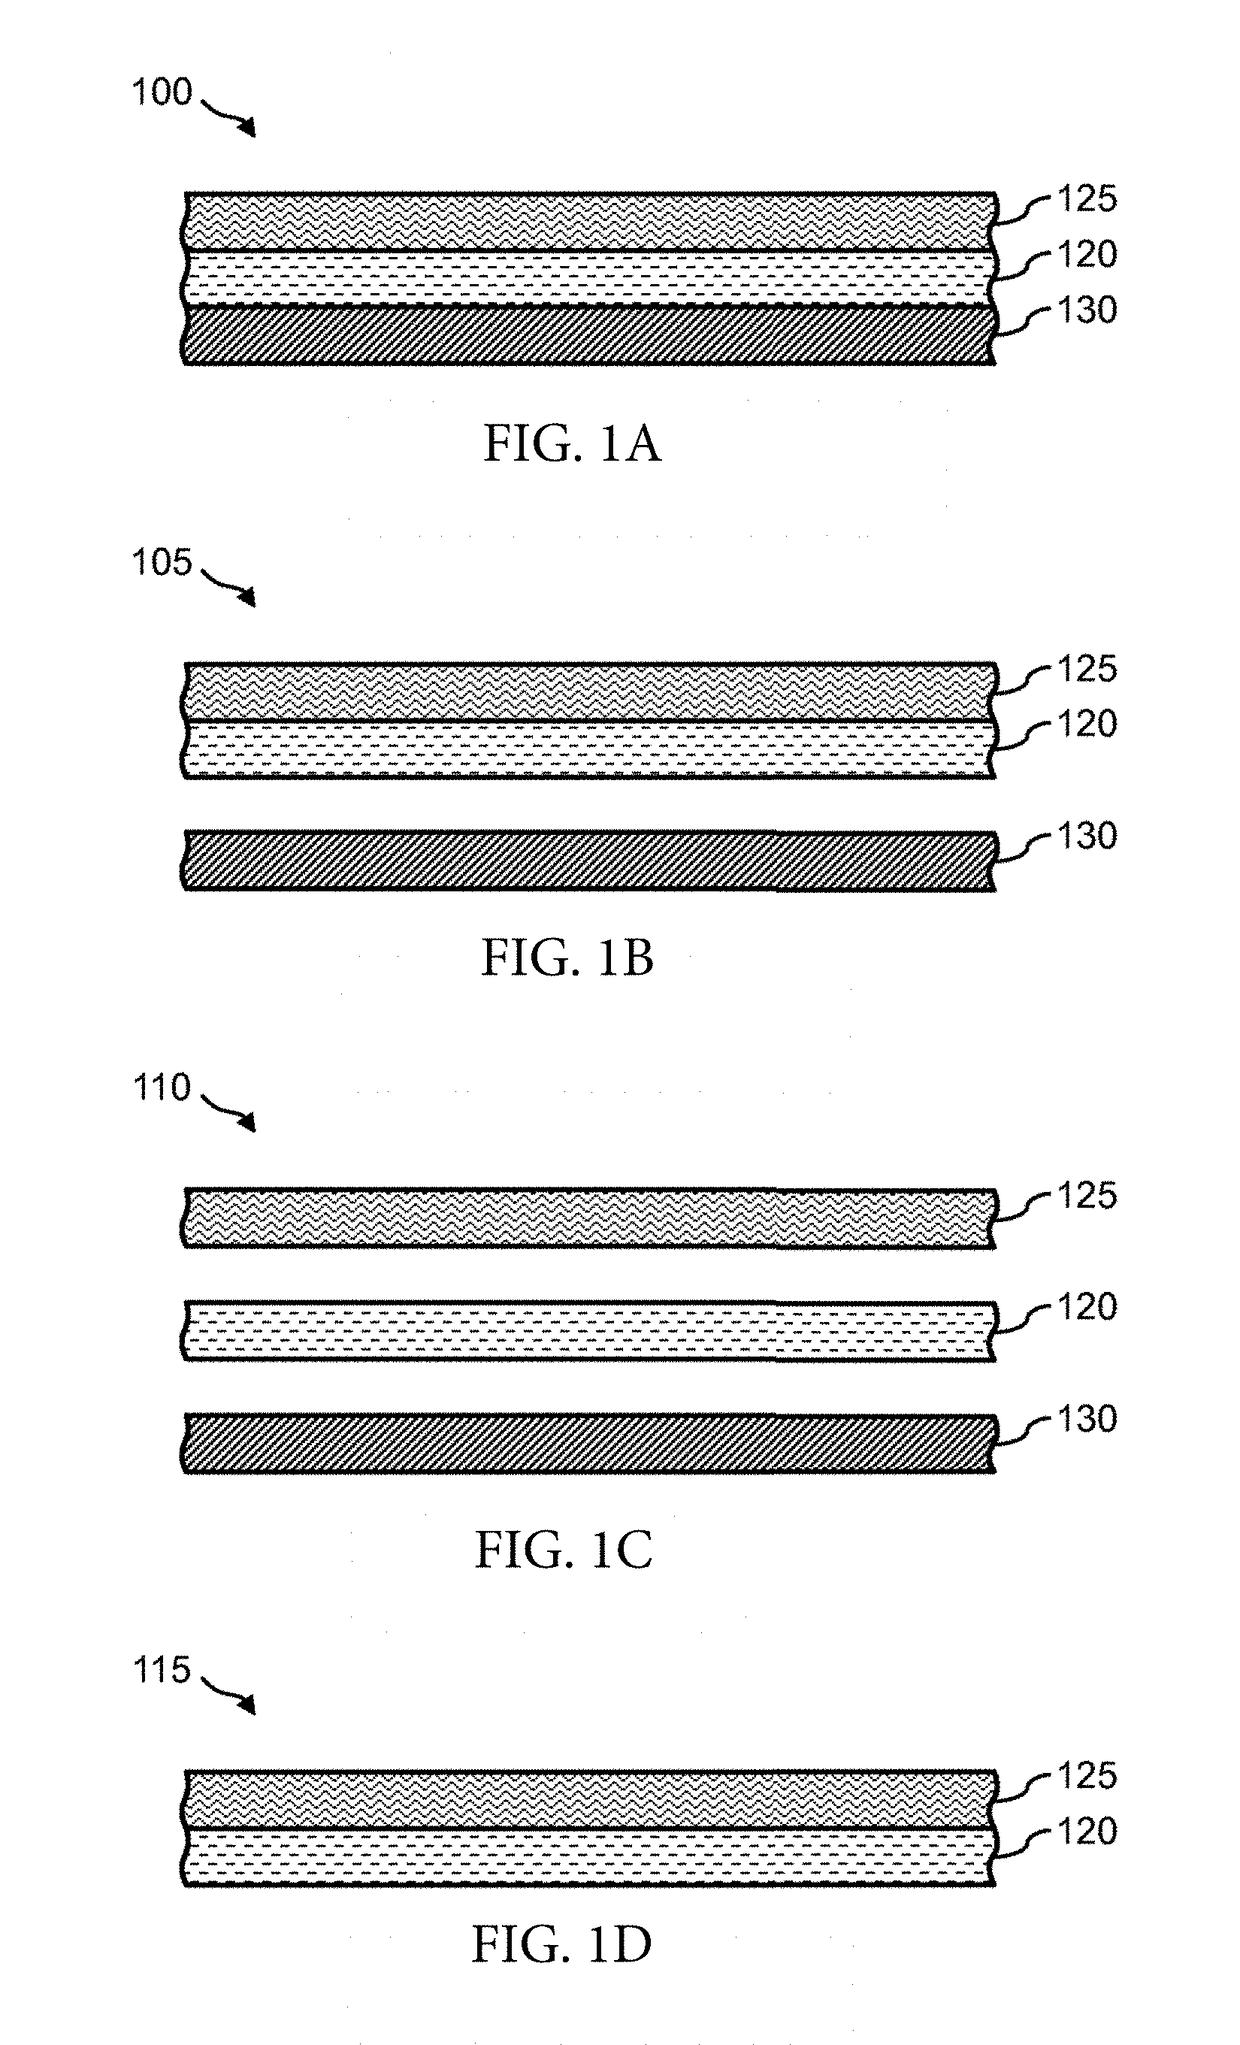 Material for Dissipating Heat From and/or Reducing Heat Signature of Electronic Devices and Clothing